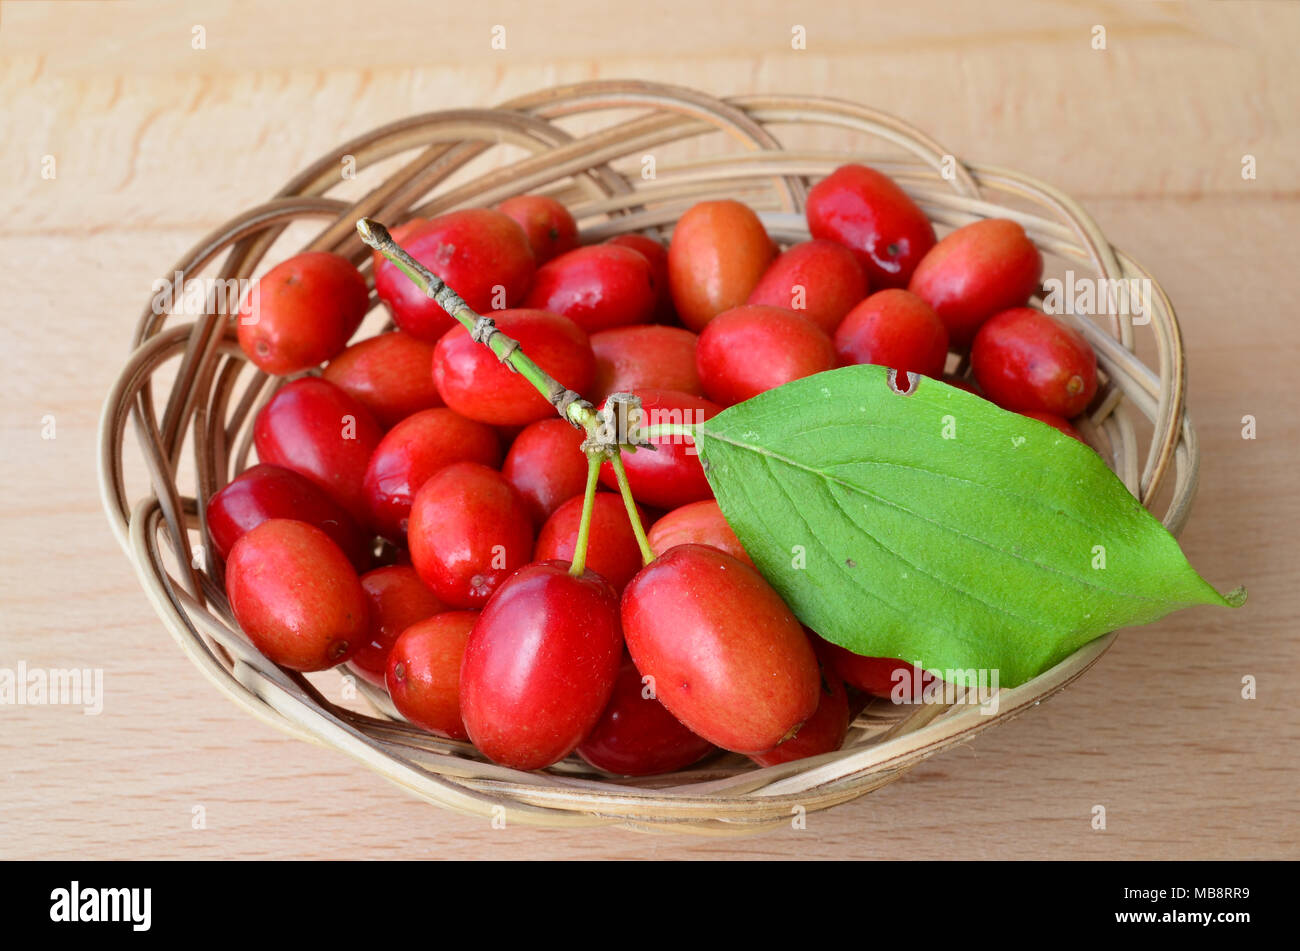 Fresh, ripe dogwood berries with green leaf in a wicker basket on wooden background, close up view Stock Photo